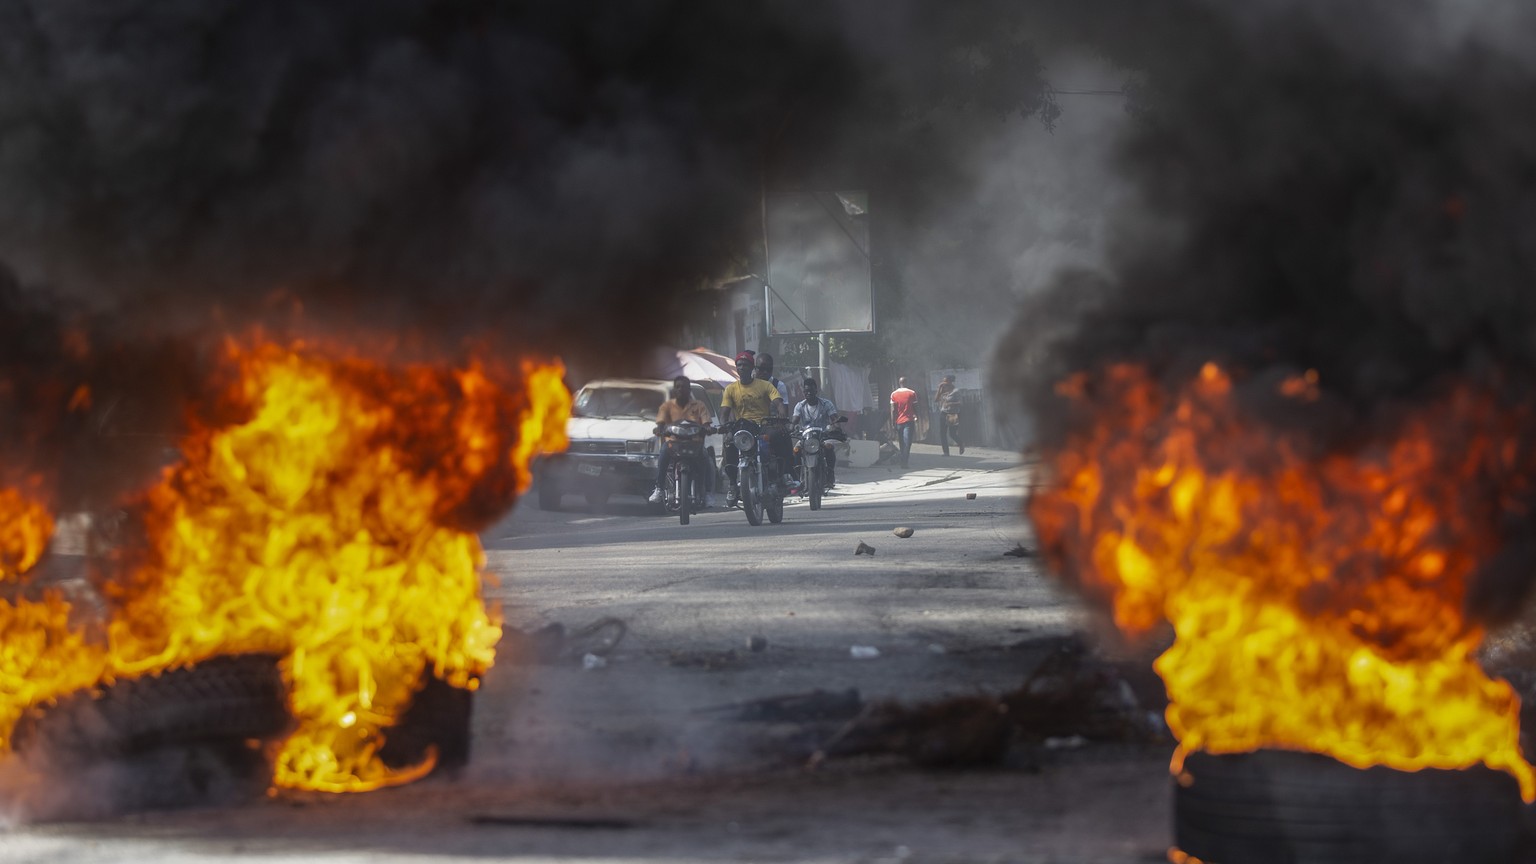 Taxi drivers run toward a barricade of burning tires set up by protesters demanding the release of kidnapped people, in Port-au-Prince, Haiti, Thursday, Nov. 25, 2021. The country is experiencing a ri ...